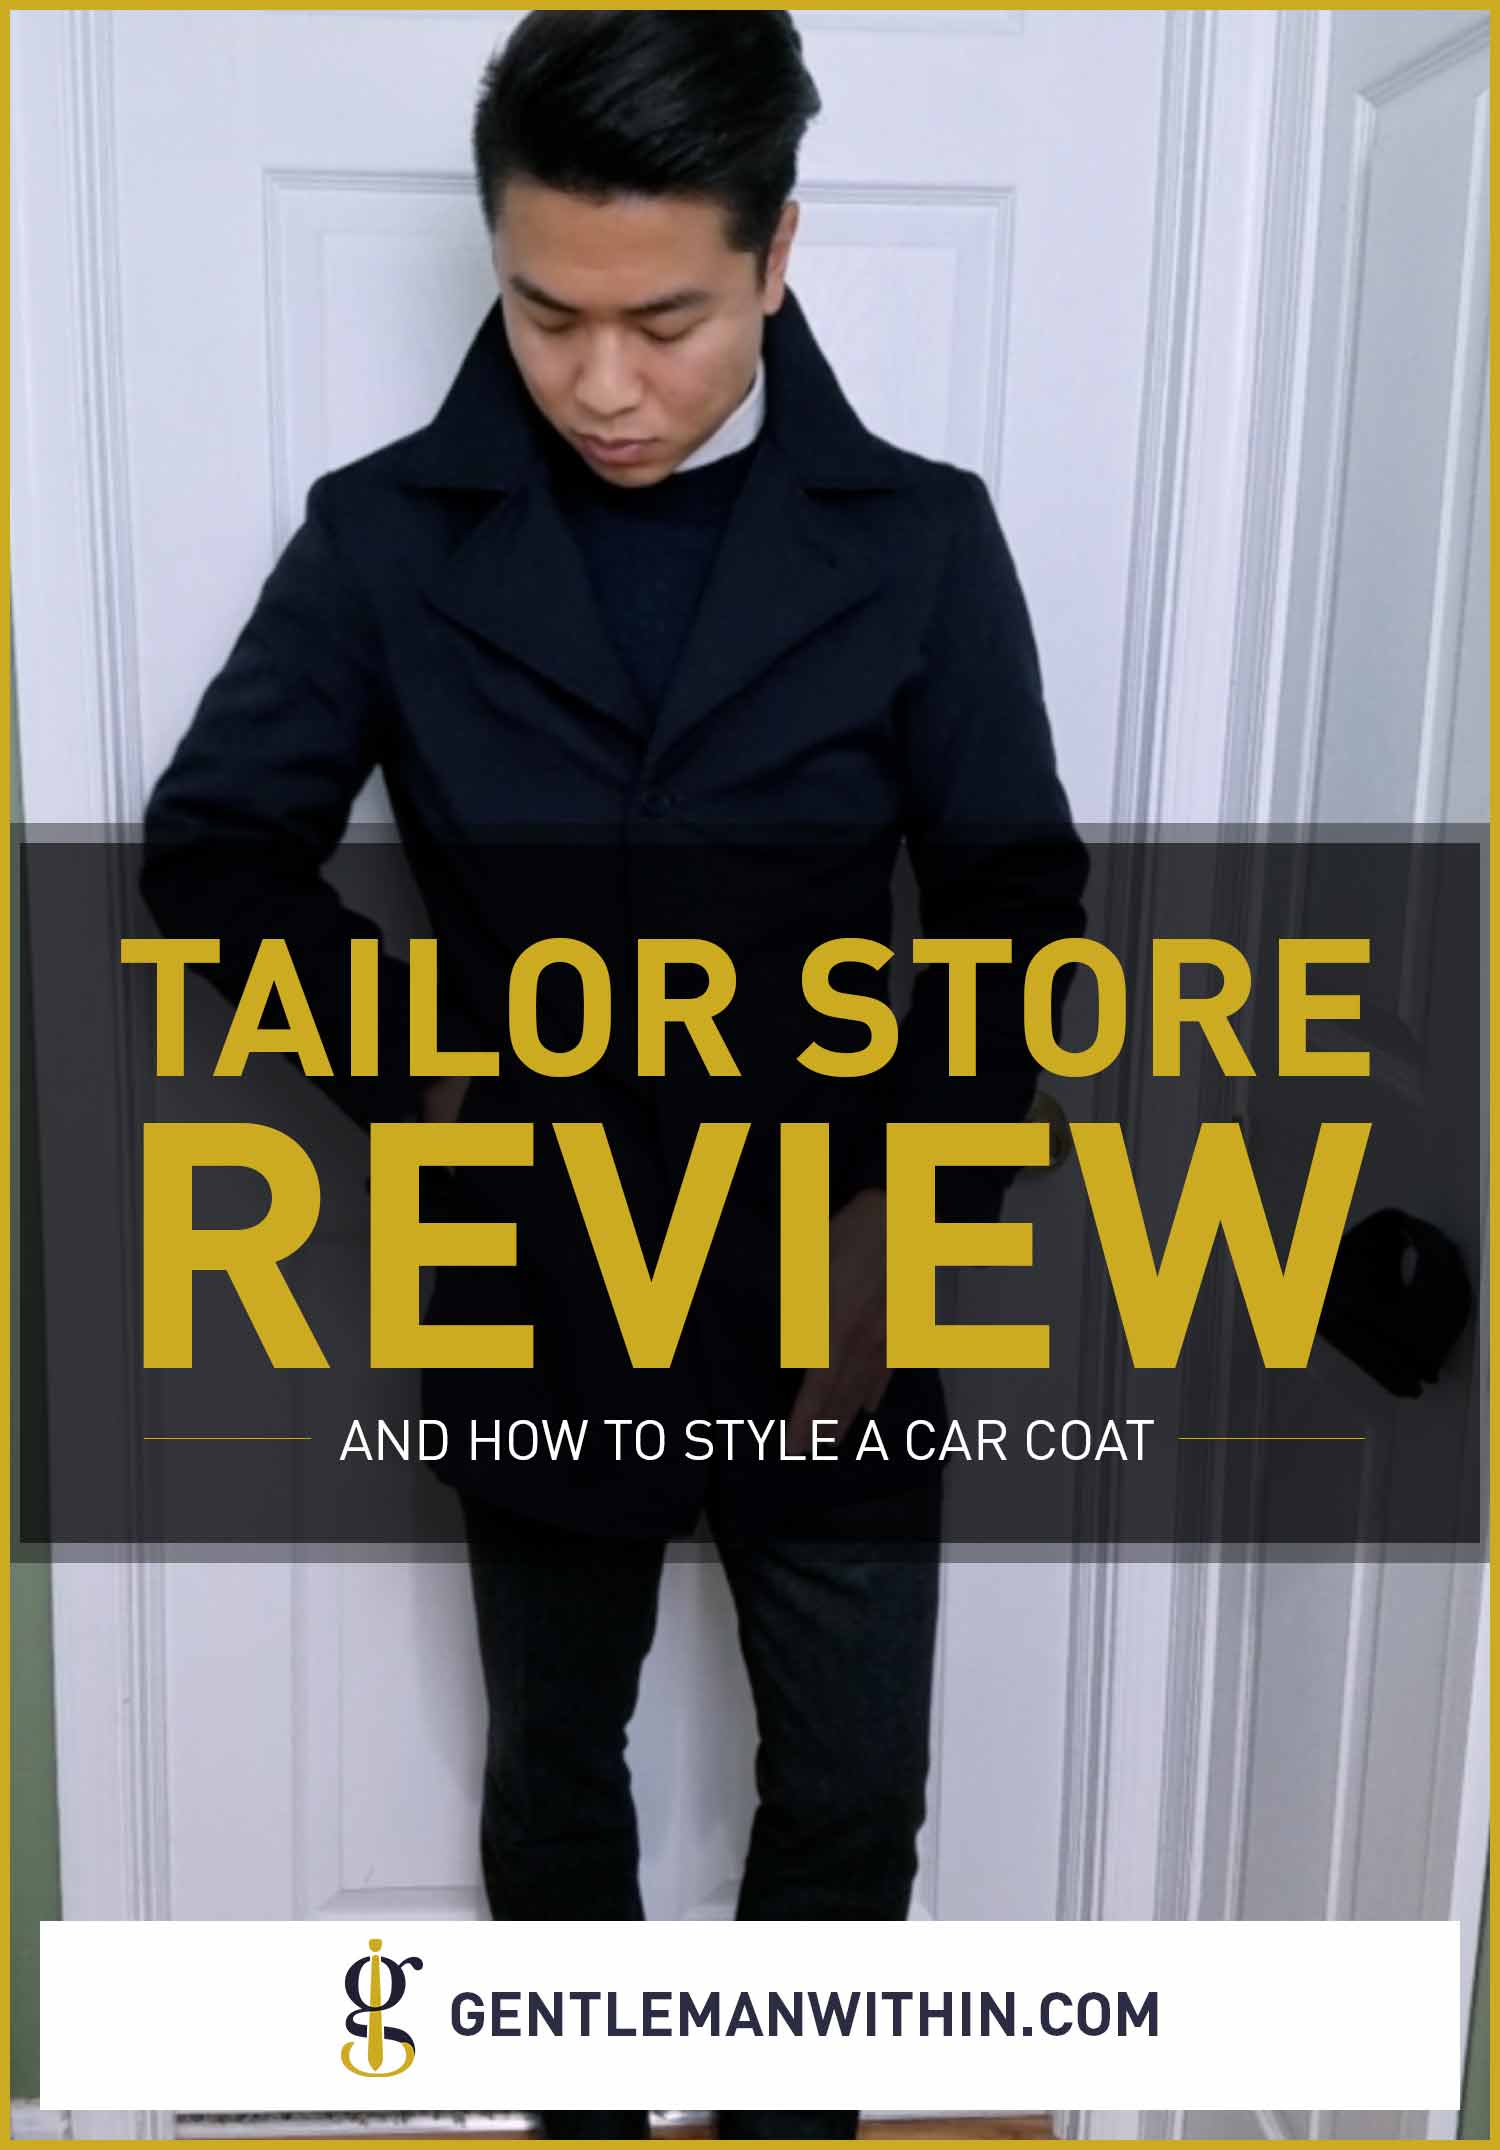 Tailor Store Review | GENTLEMAN WITHIN